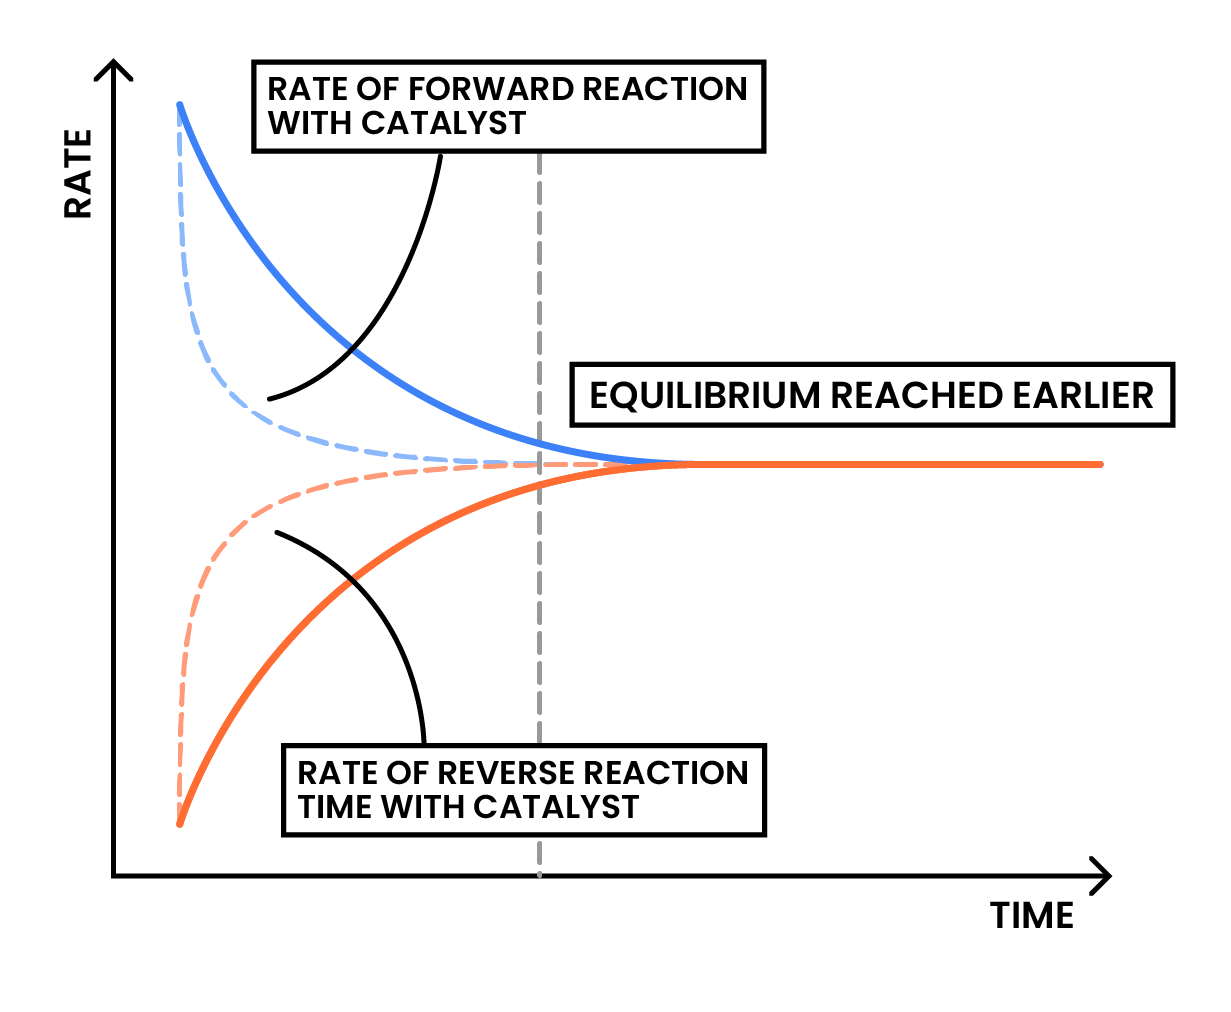 edexcel_igcse_chemistry_topic 20_reversible reactions and equilibria_004_catalyst effect on rate of reaction